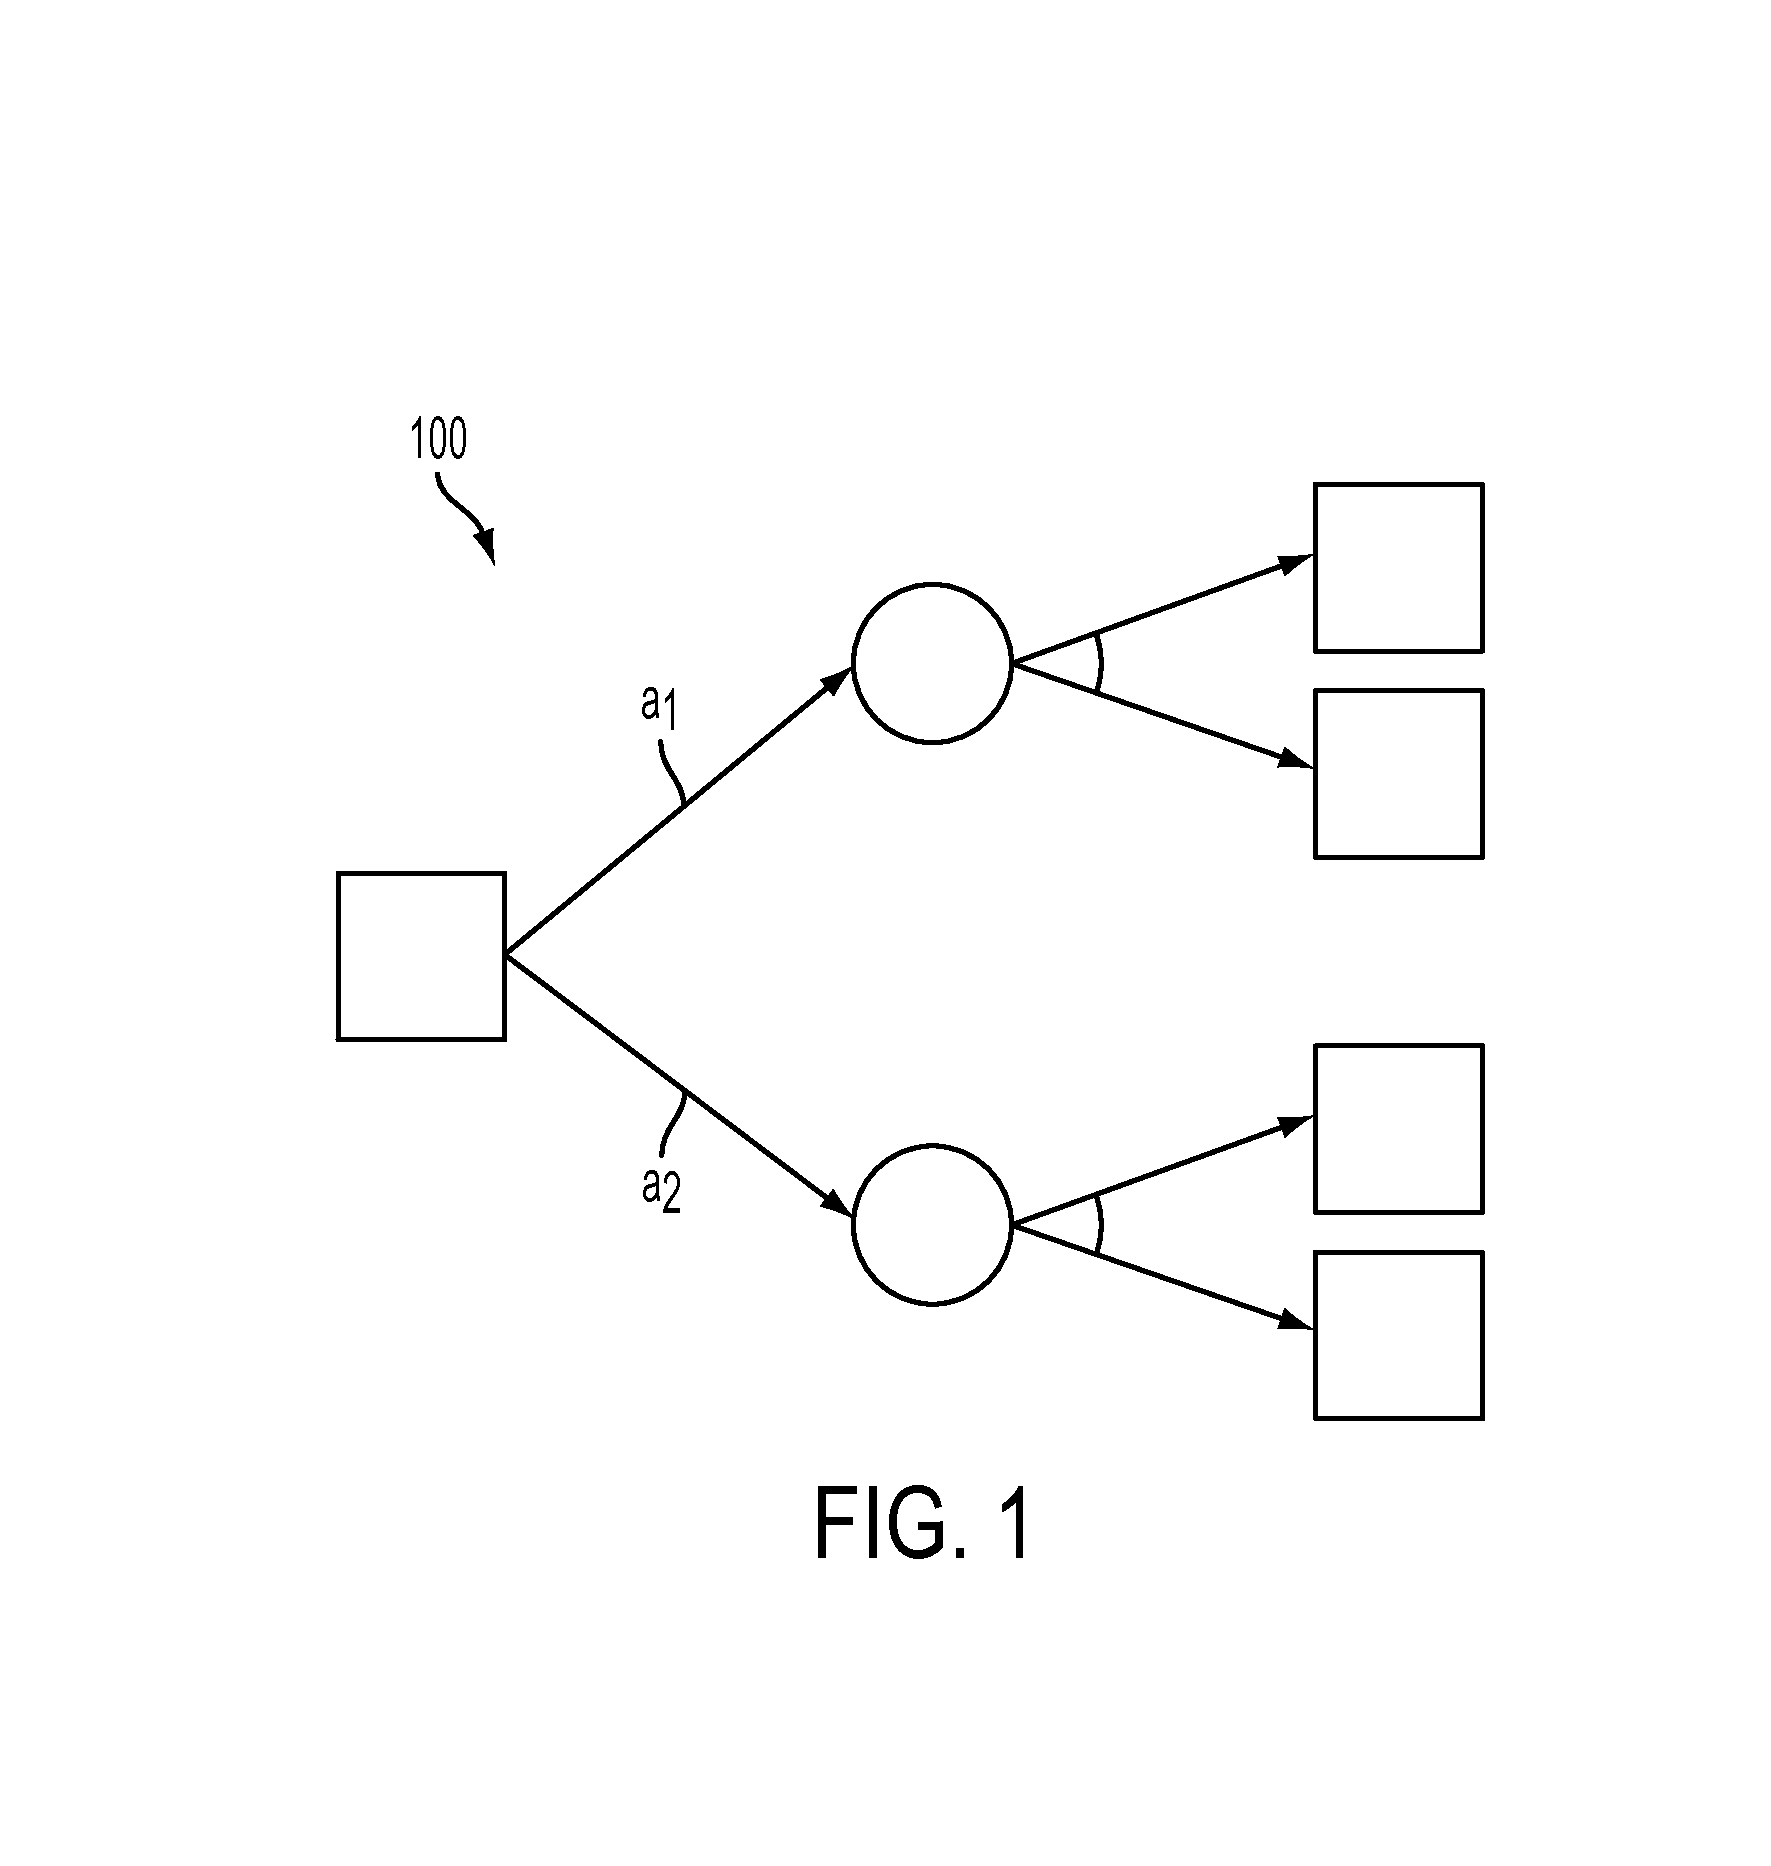 System and method for parallel edge partitioning in and/or graph search